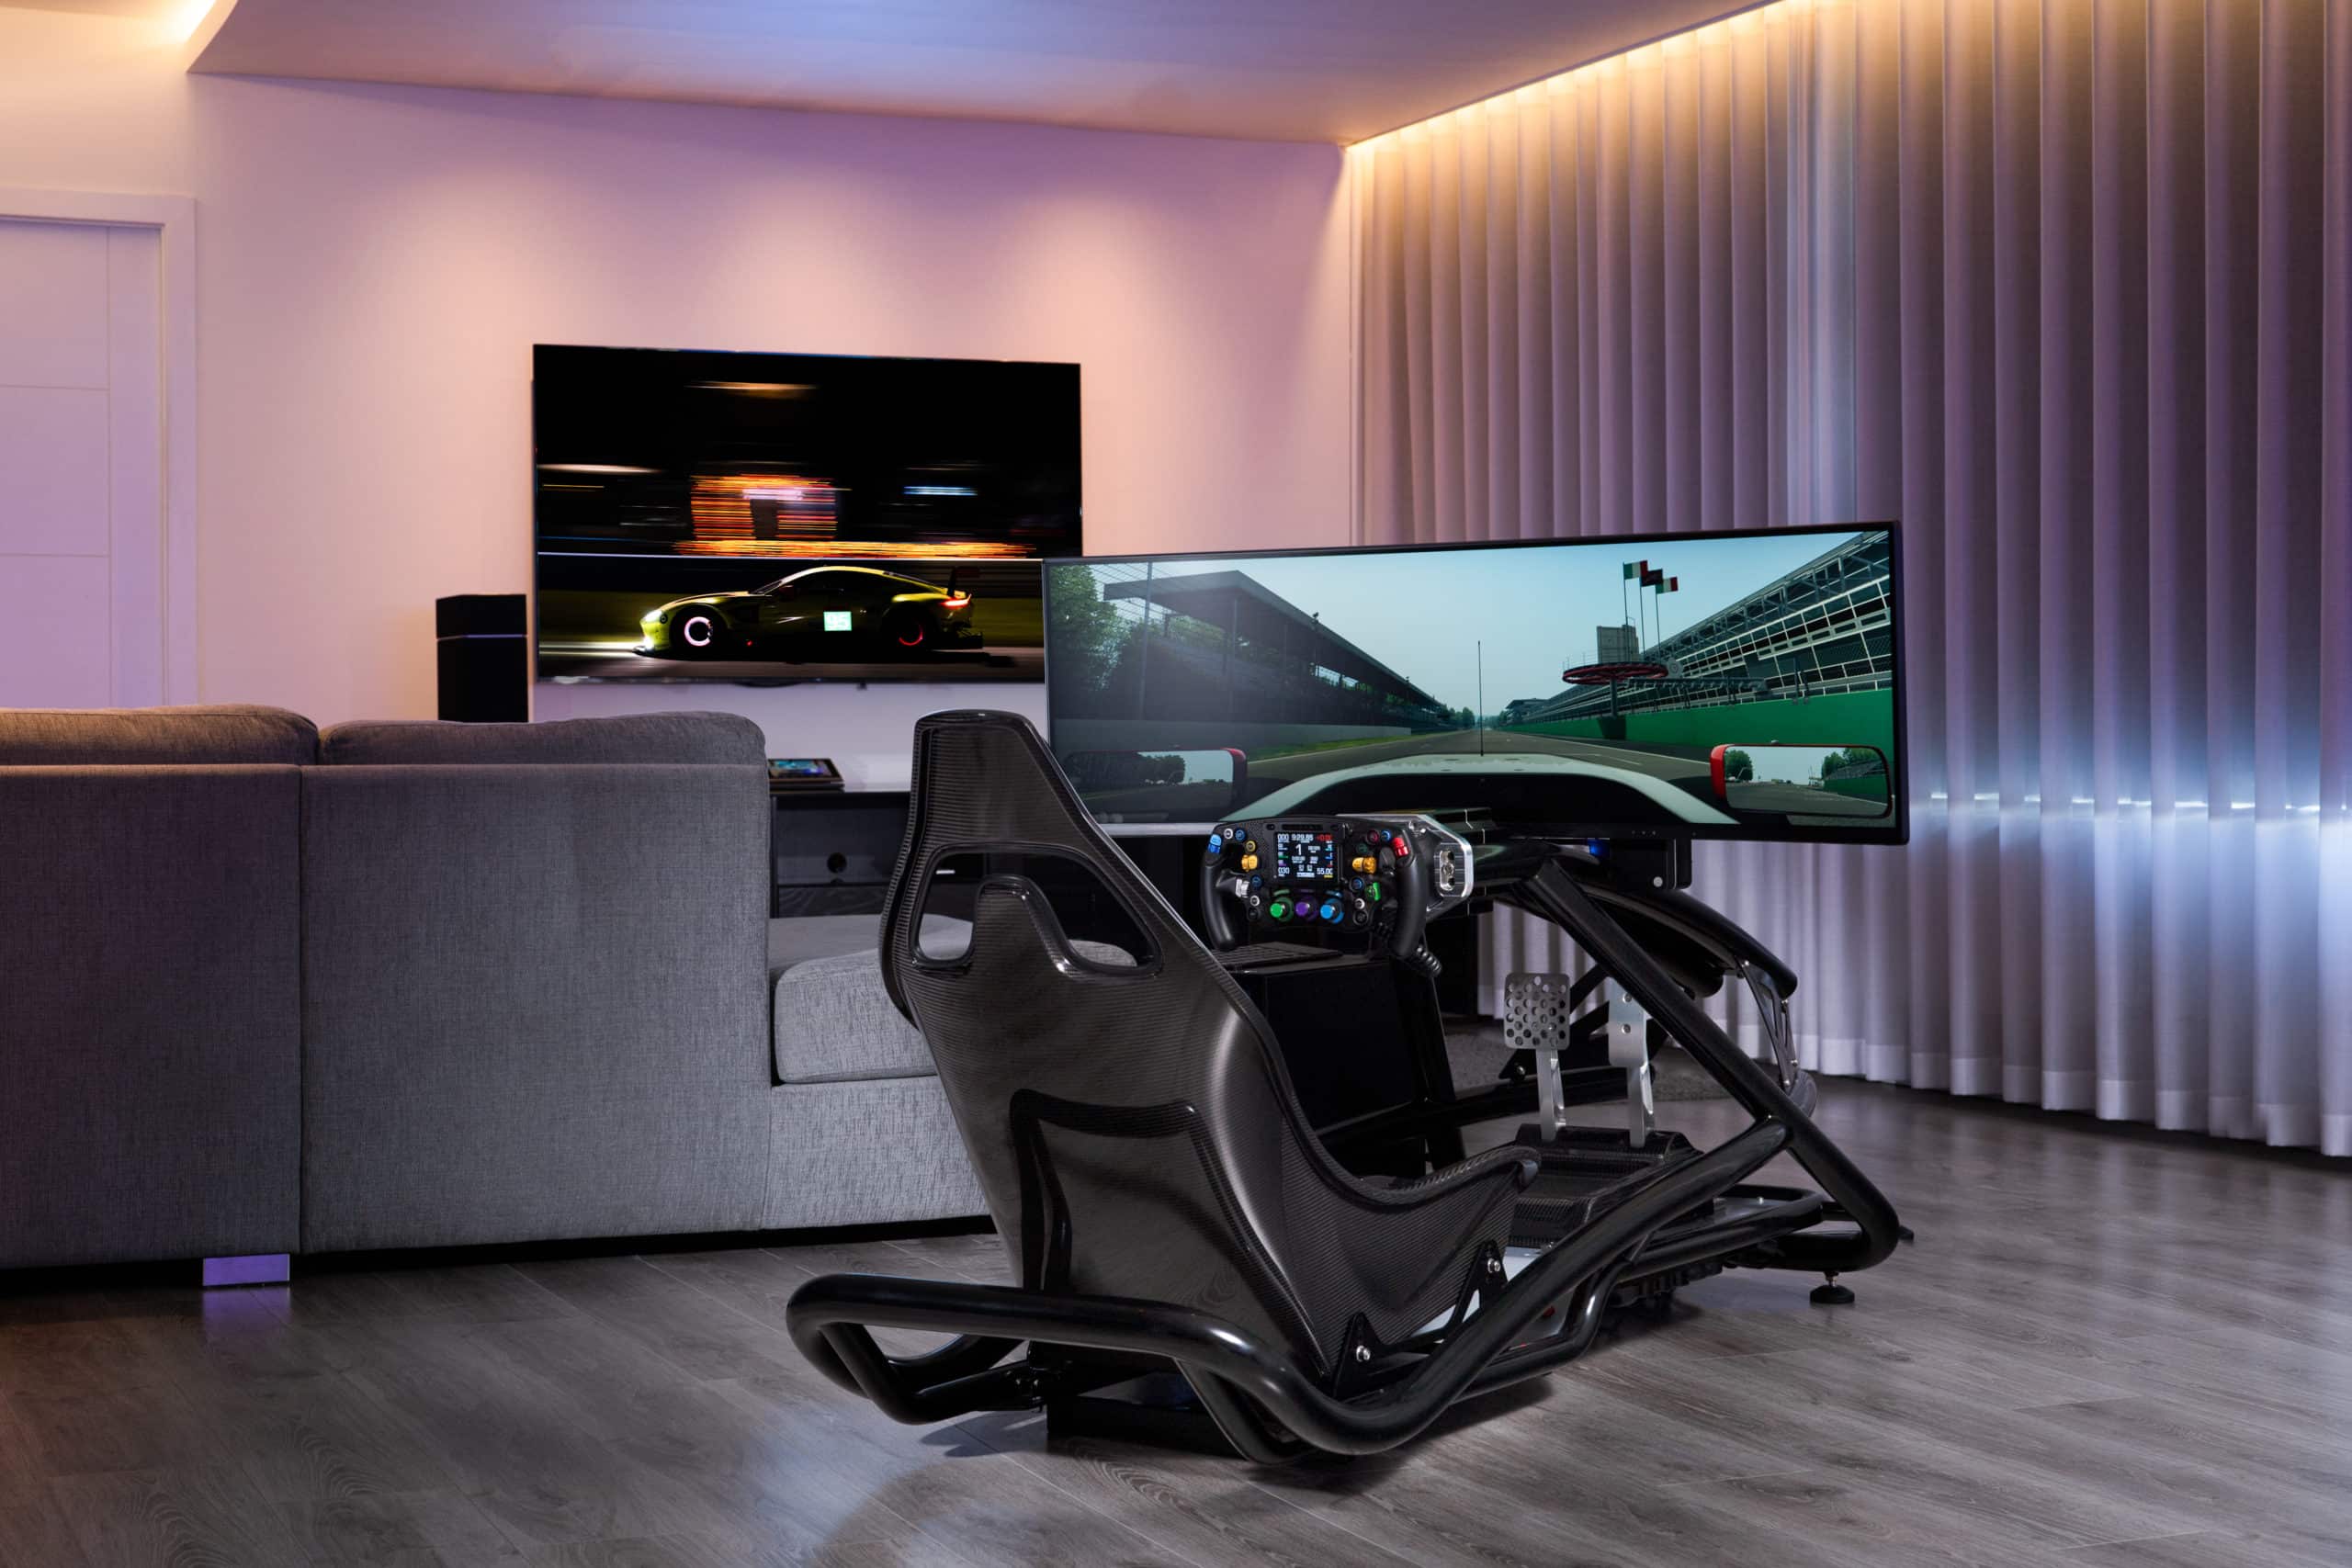 Base Performance Simulators, one the Official OEM Partners of Simucube, creates sim racing rigs for sim racers with Simucube 2 Sport, Pro and Ultimate Direct Drive Force Feedback Wheelbases.